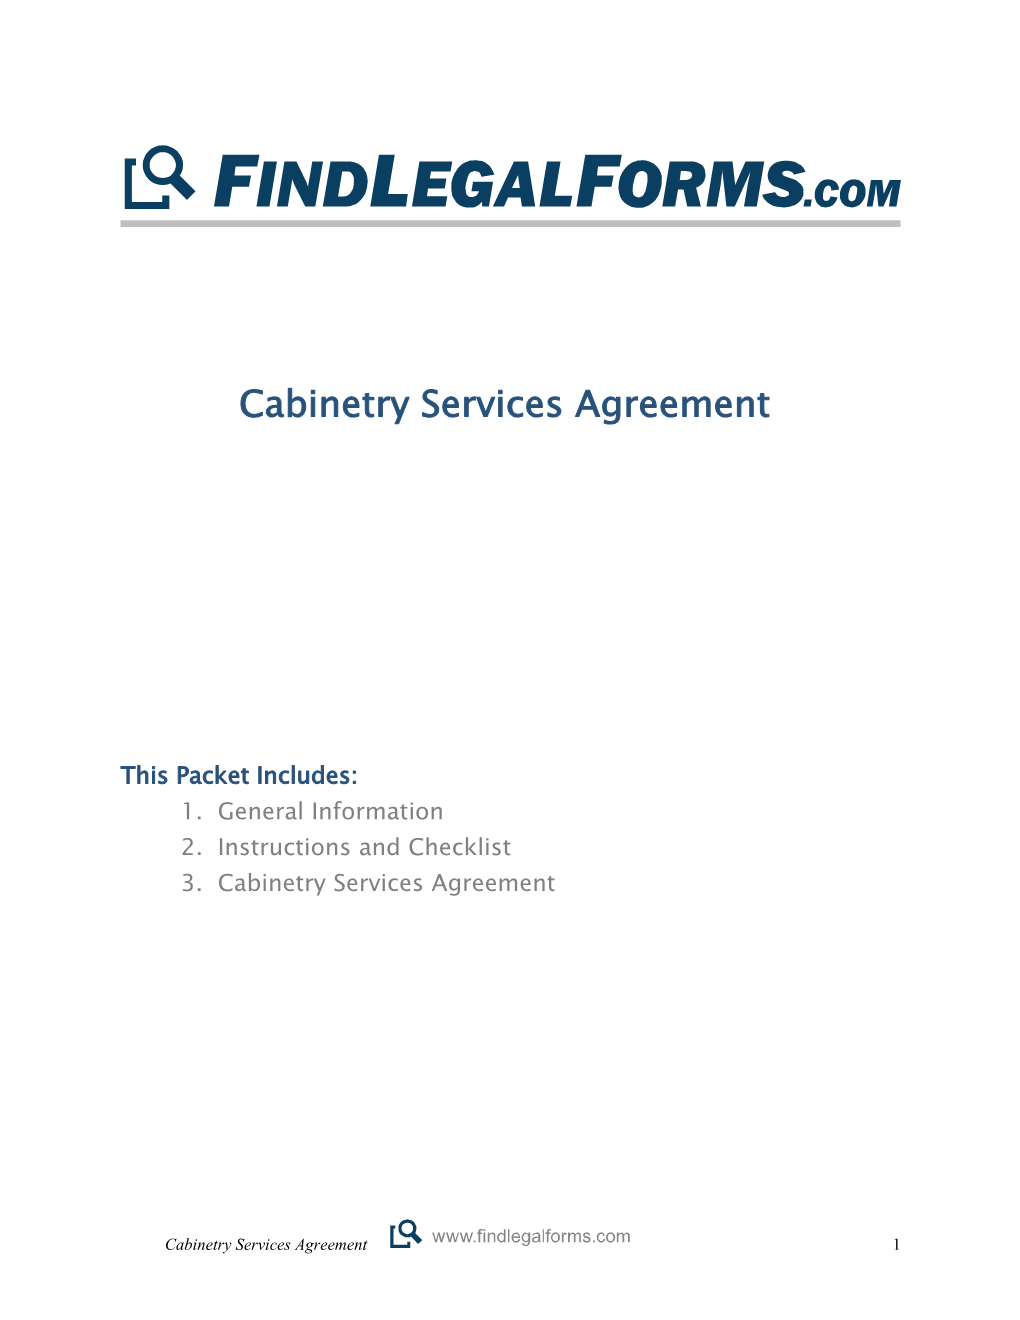 Cabinetry Services Agreement